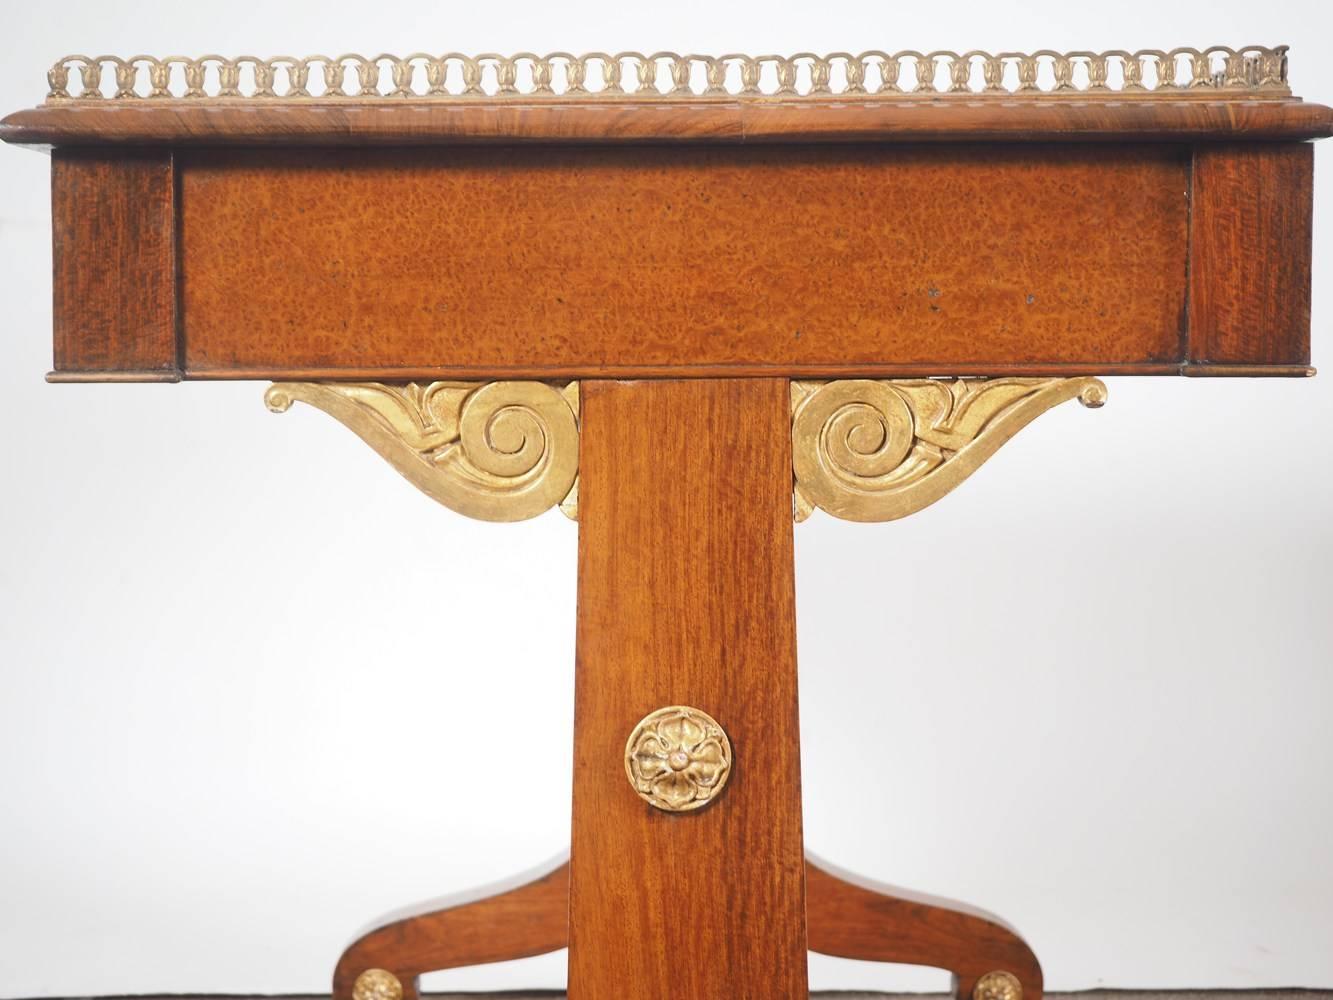 Fine quality Regency period writing table made from amboyna and padouk with parcel-gilt enrichments and ebony knobs, circa 1820.